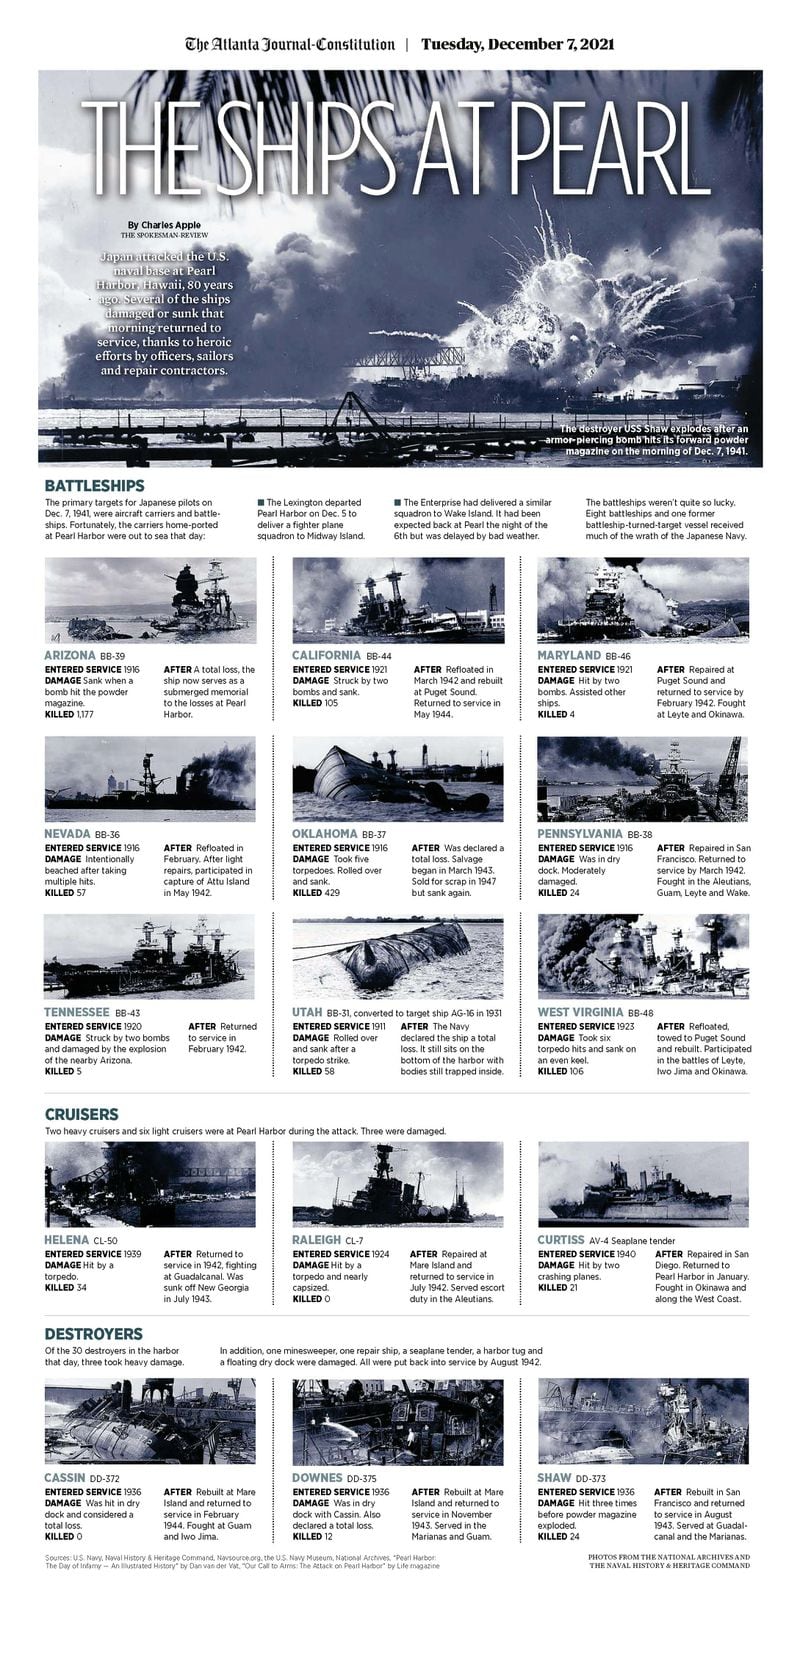 Remembering Pearl Harbor — a special section in today’s ePaper